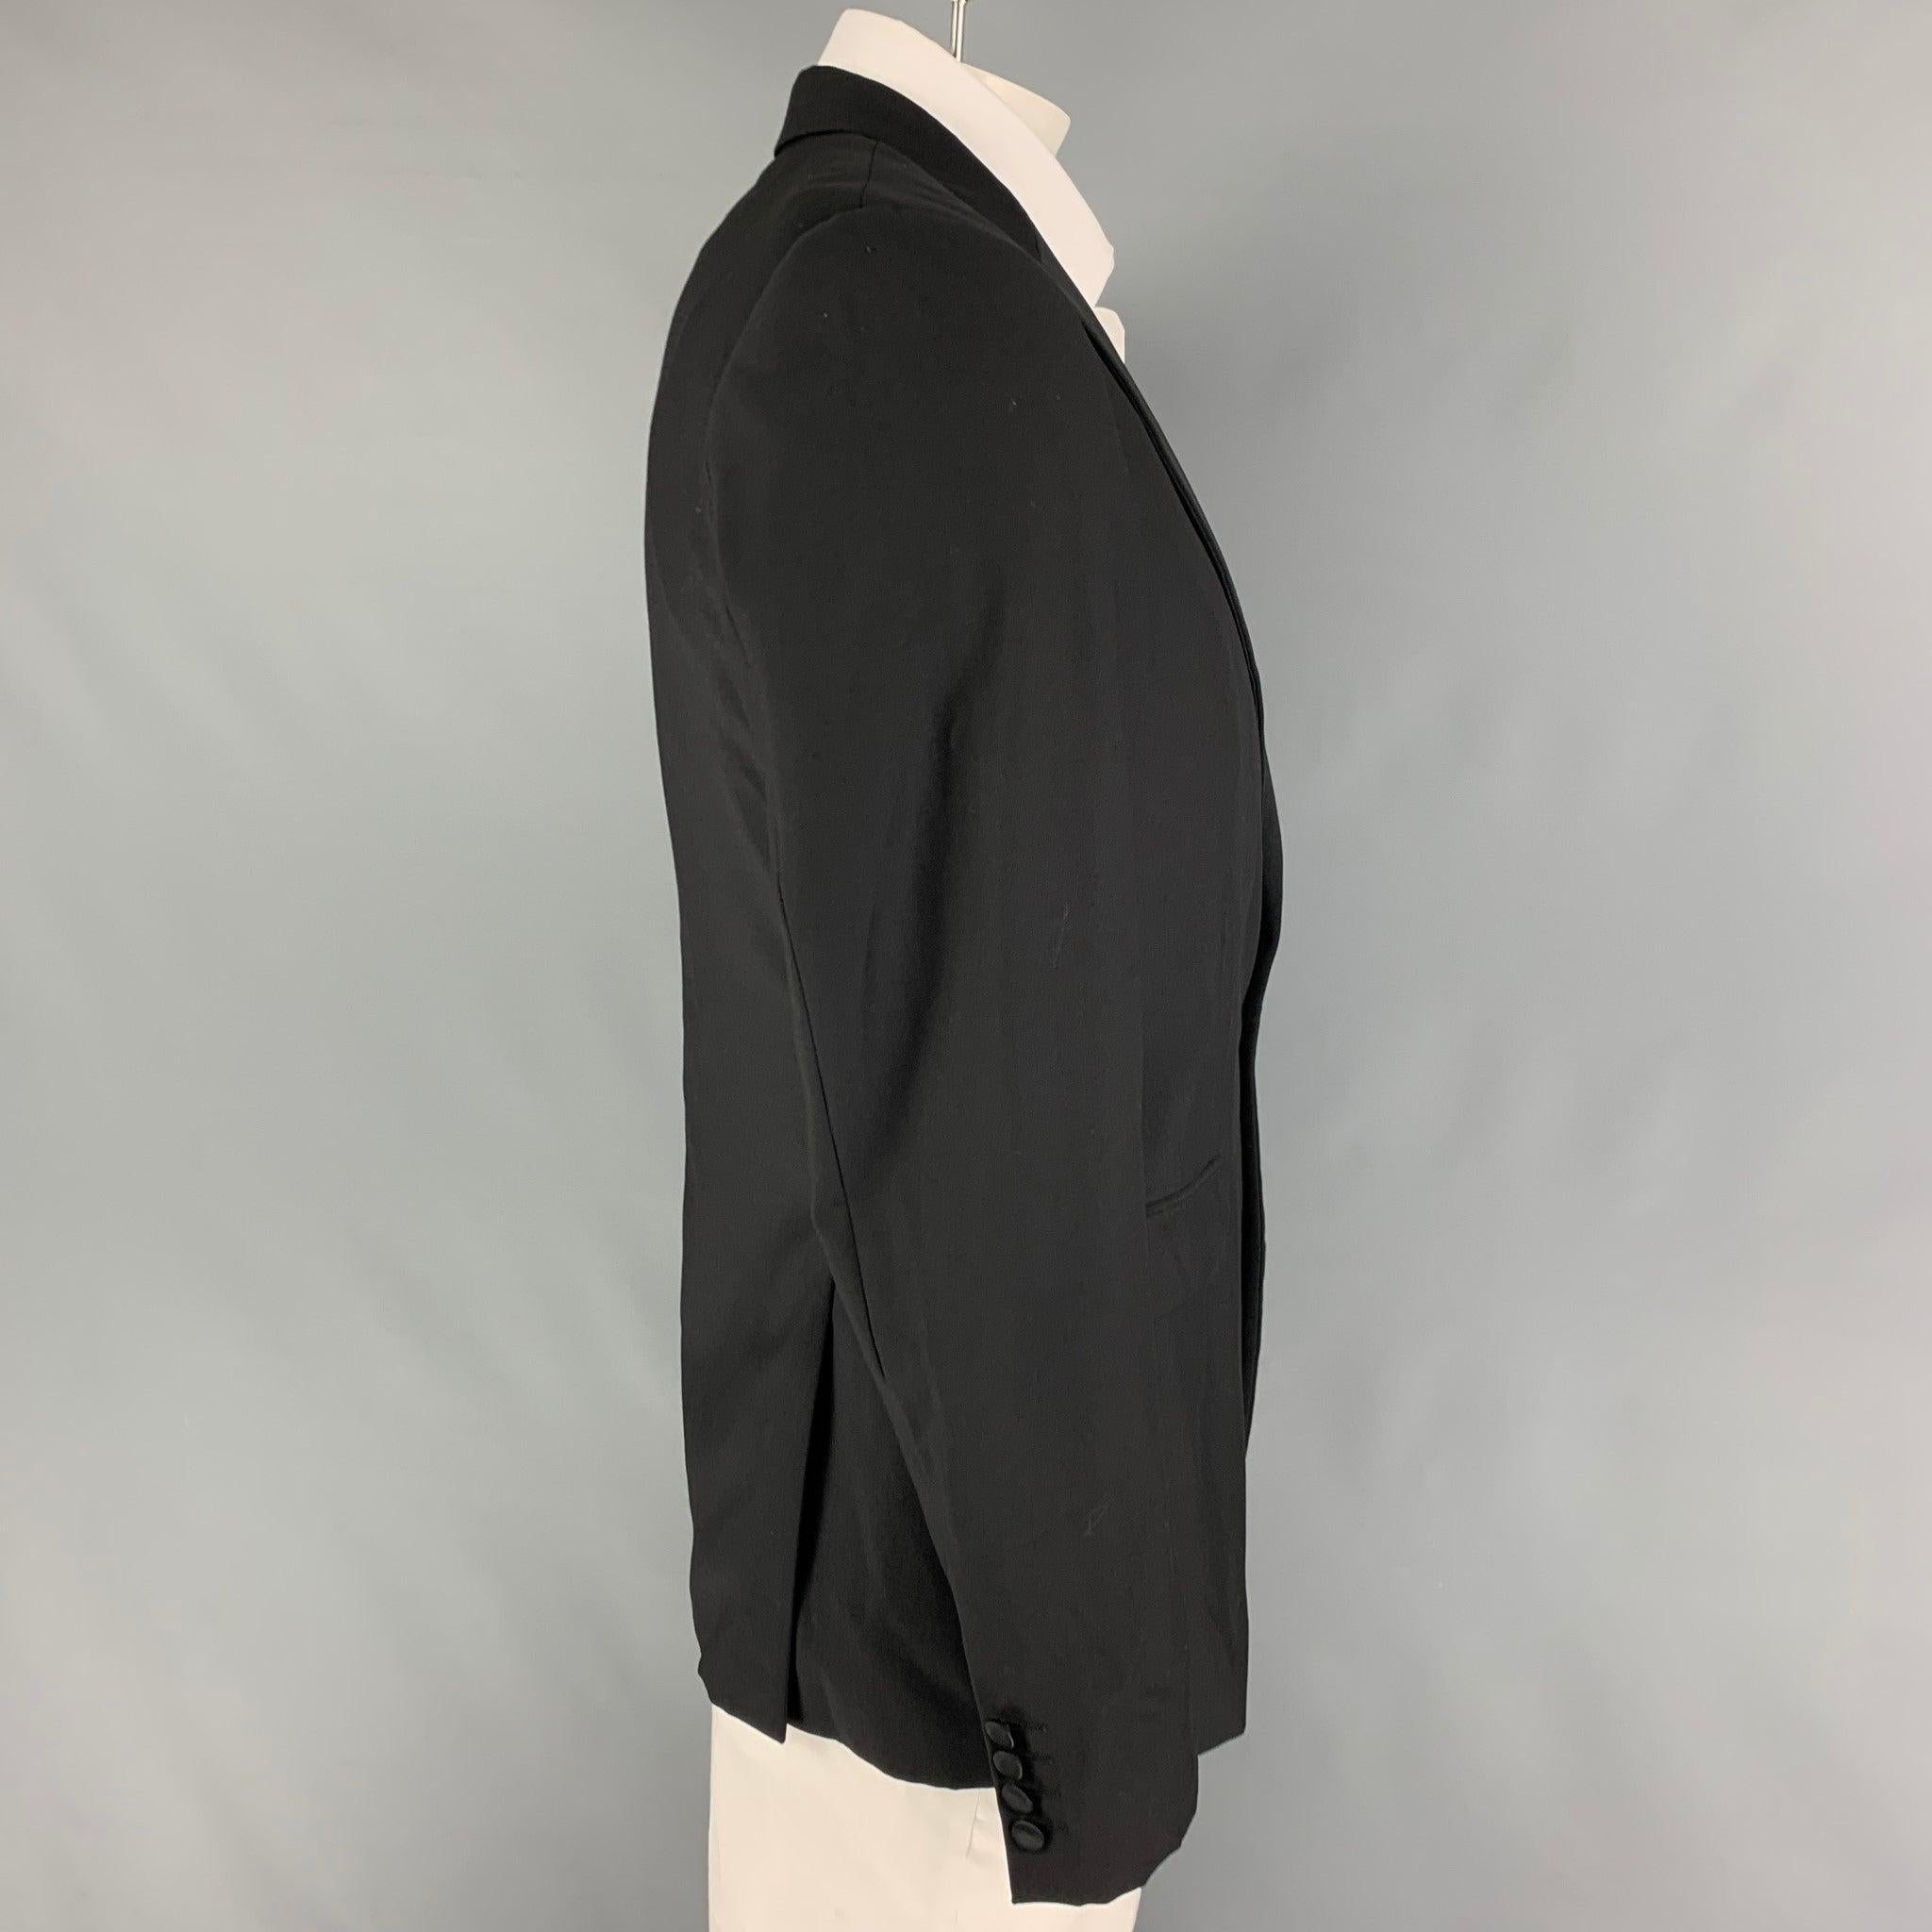 CALVIN KLEIN COLLECTION sport coat comes in a black wool with a full liner featuring a peak lapel, flap pockets, double back vent, and a single button closure.
Very Good
Pre-Owned Condition. 

Marked:   50/40 

Measurements: 
 
Shoulder: 18 inches 